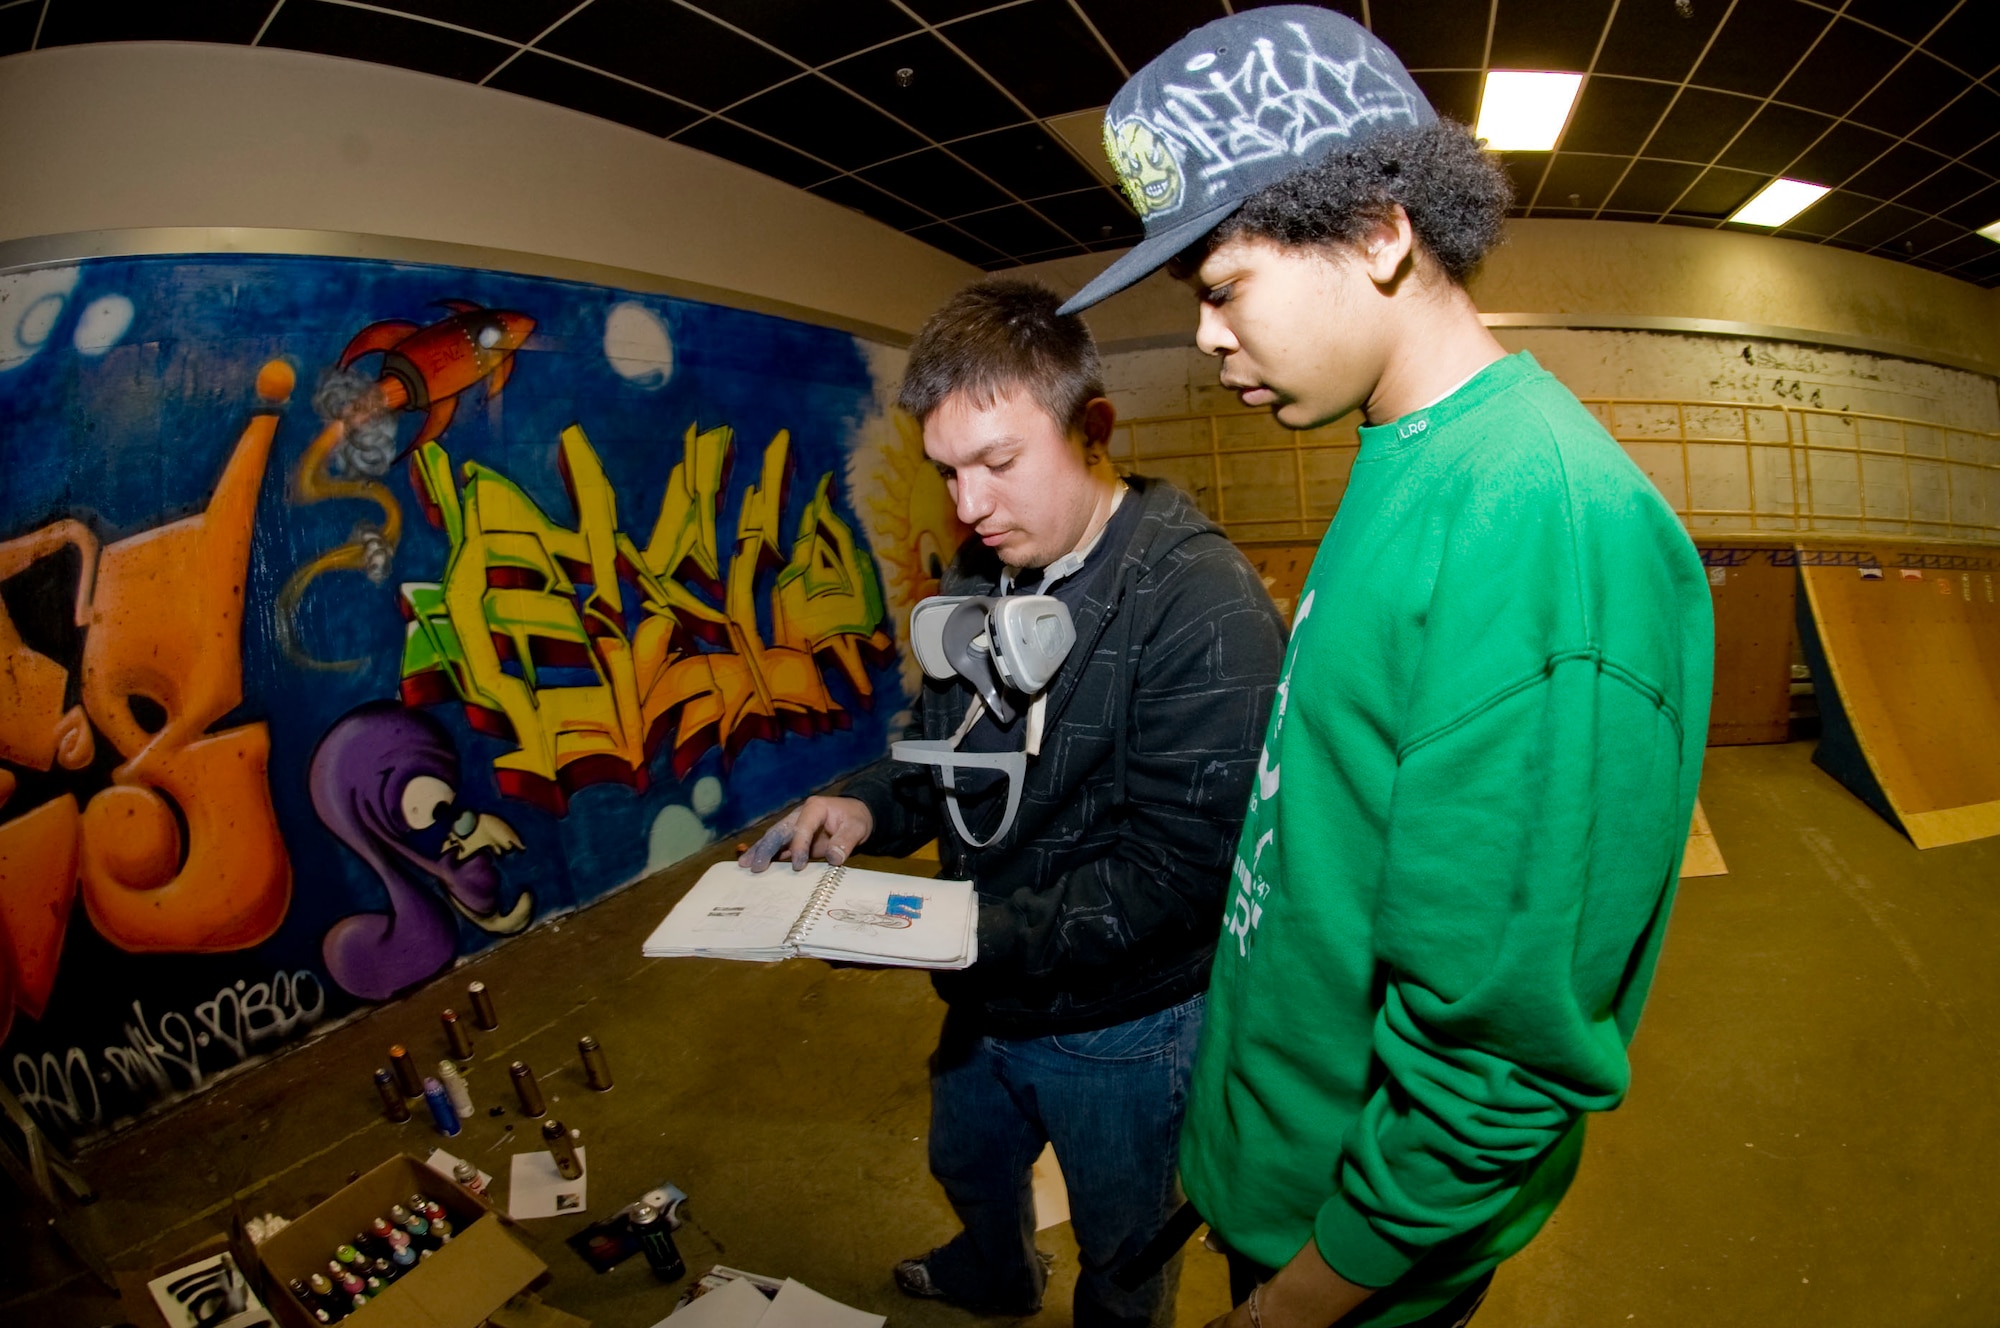 ELMENDORF AIR FORCE BASE, Alaska -- Staff Sgt. Art Delafuente and Arielo Taylor, a civilain, collaborate on a graffiti design to paint at the indoor skate park inside of Arctic Oasis Community Center April 3, 2009. Delafuente is a crew chief from 19th Aircraft Maintenance Unit and has spent around 50 hours volunteering to decorate the skate park with graffiti. (U.S. Air Force photo by Senior Airman Jonathan Steffen) 